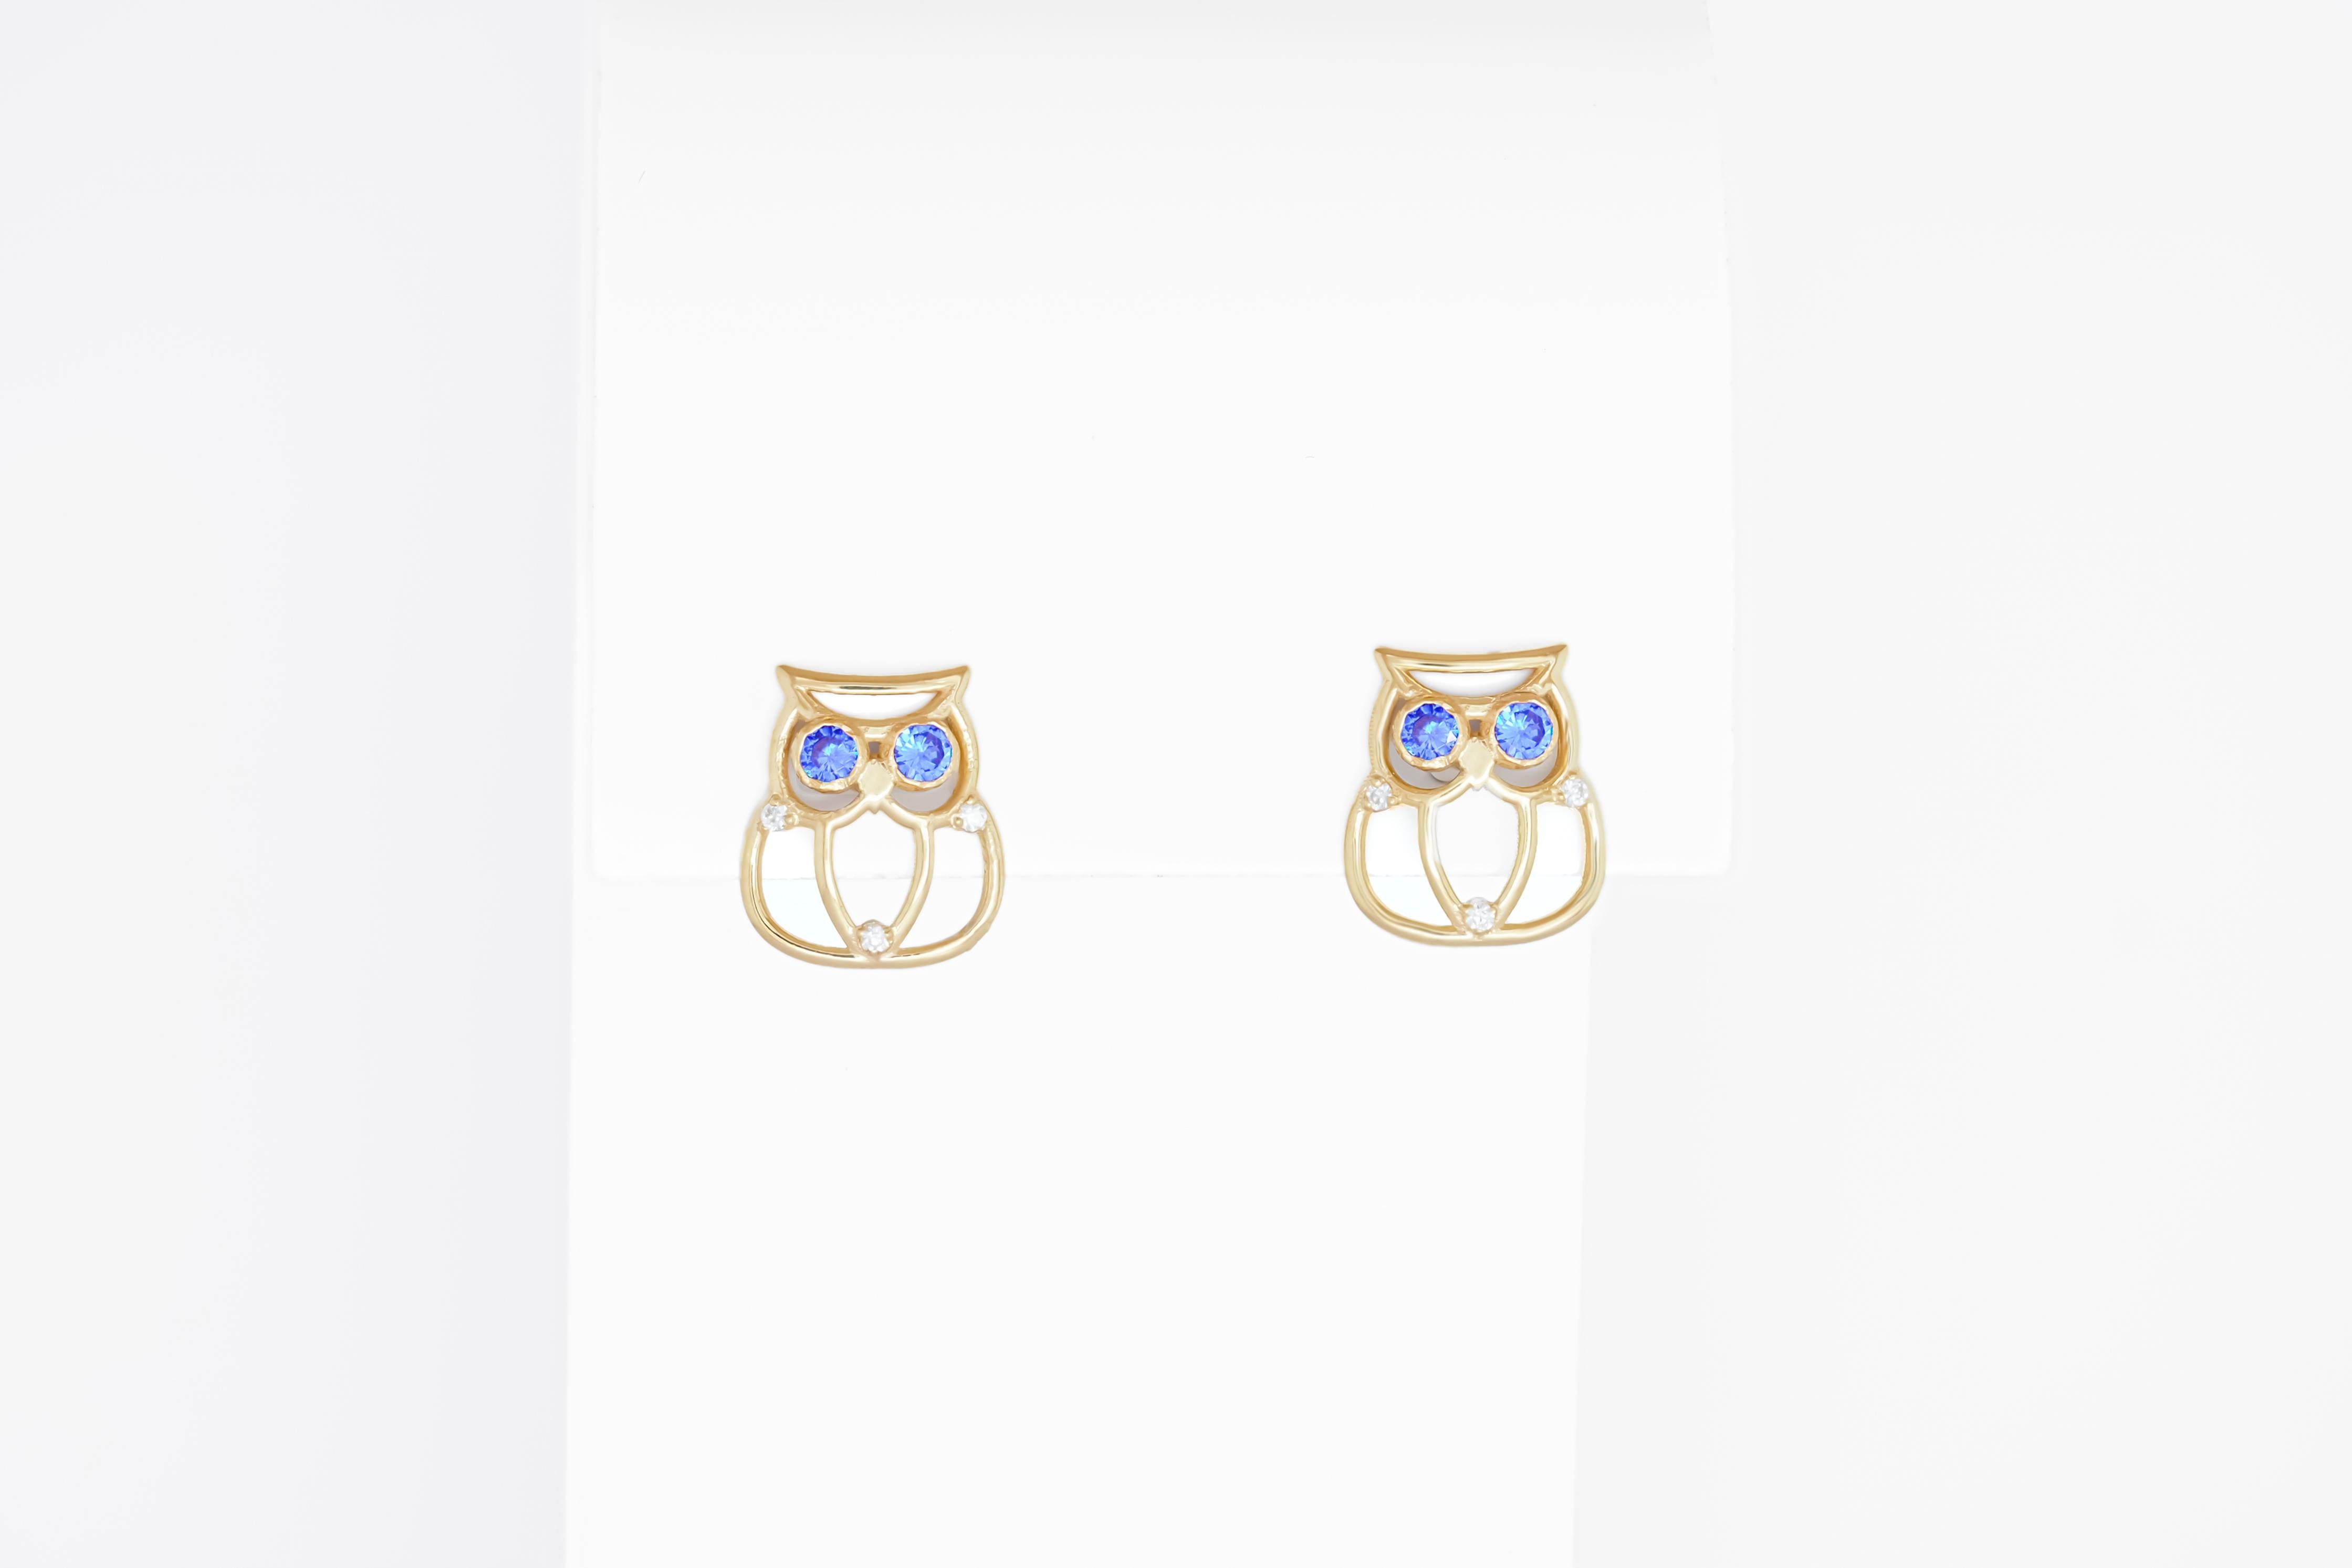 Owl earrings in 14k gold. Bird earrings with sapphires. Delicate gold earrings with blue gemstones. Blue sapphire earrings. 
 
Metal - 14k gold
Total Weight -2 gr
Earrings size: 12x10mm
Gemstones
2 sapphires, round cut, blue color, transparent, 0.14